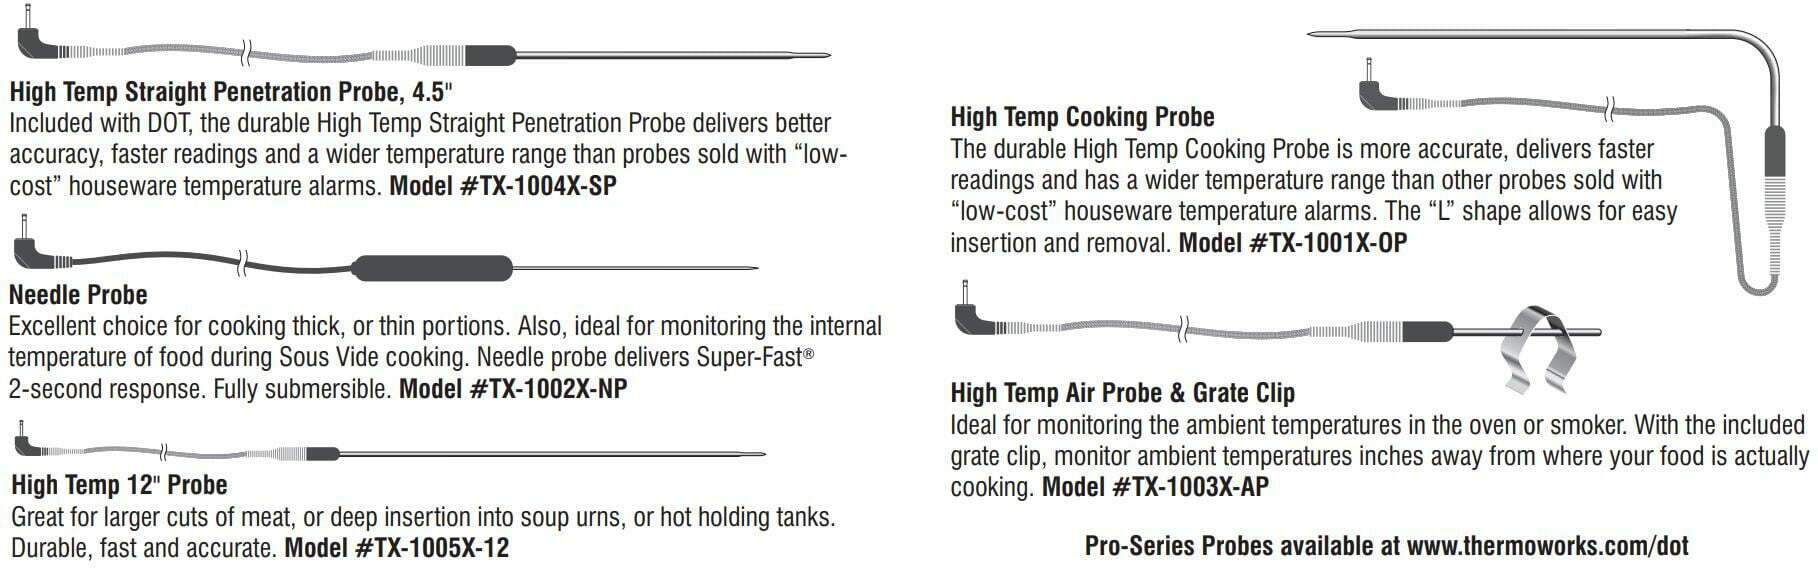 ThermoWorks DOT® Simple Alarm Thermometer User Manual - Optional Pro-Series Probes